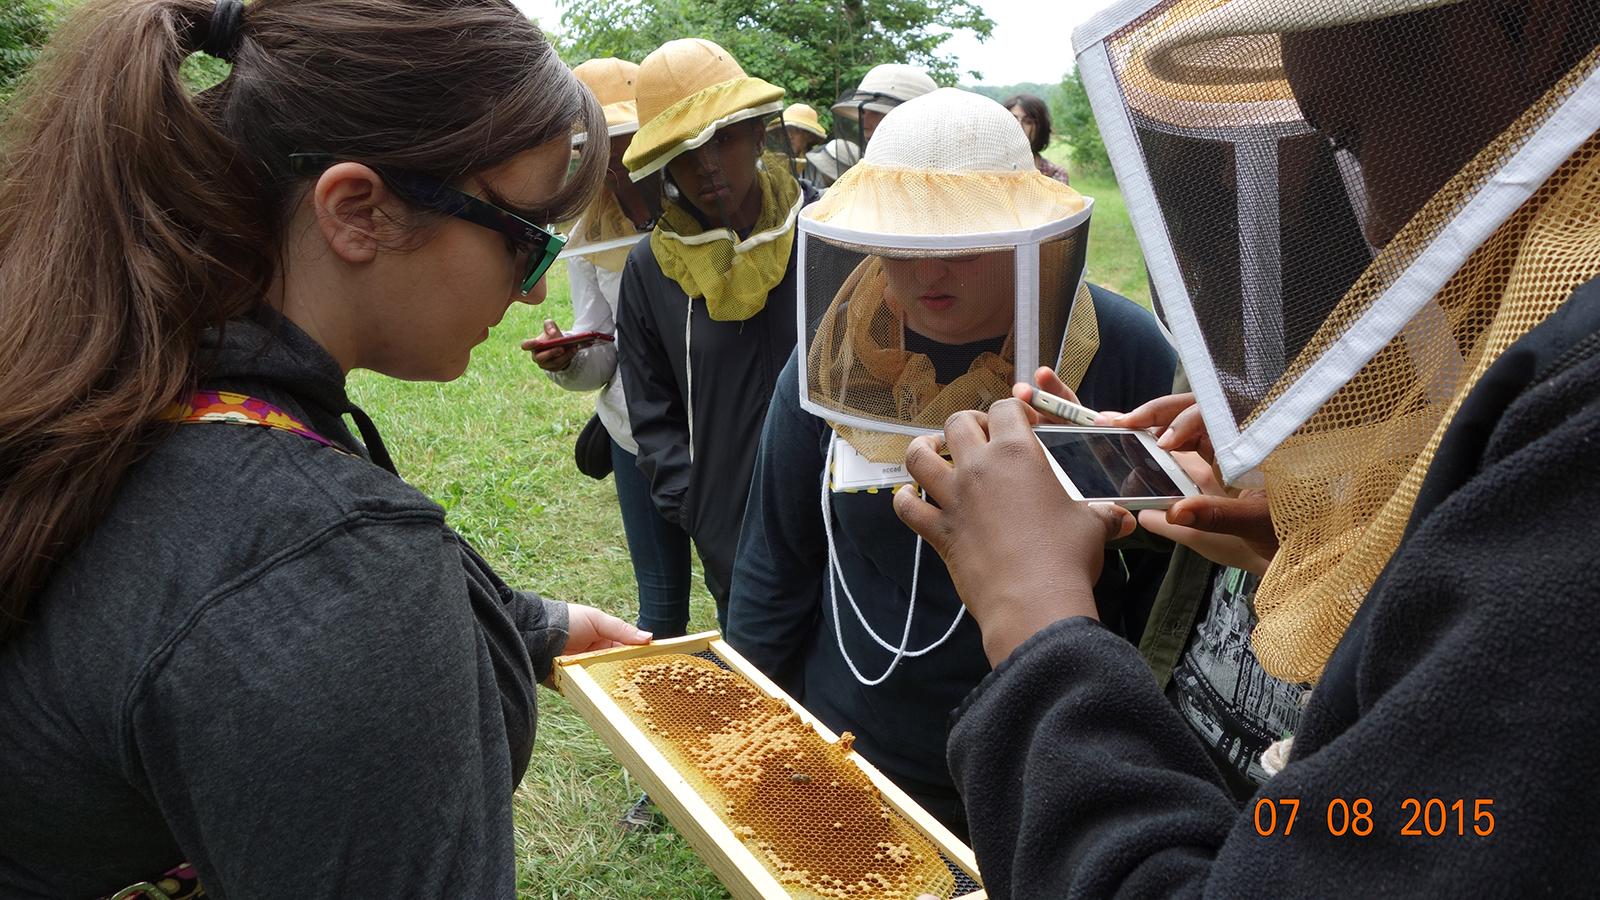 Group viewing honeycomb at the Stratford Ecological Center